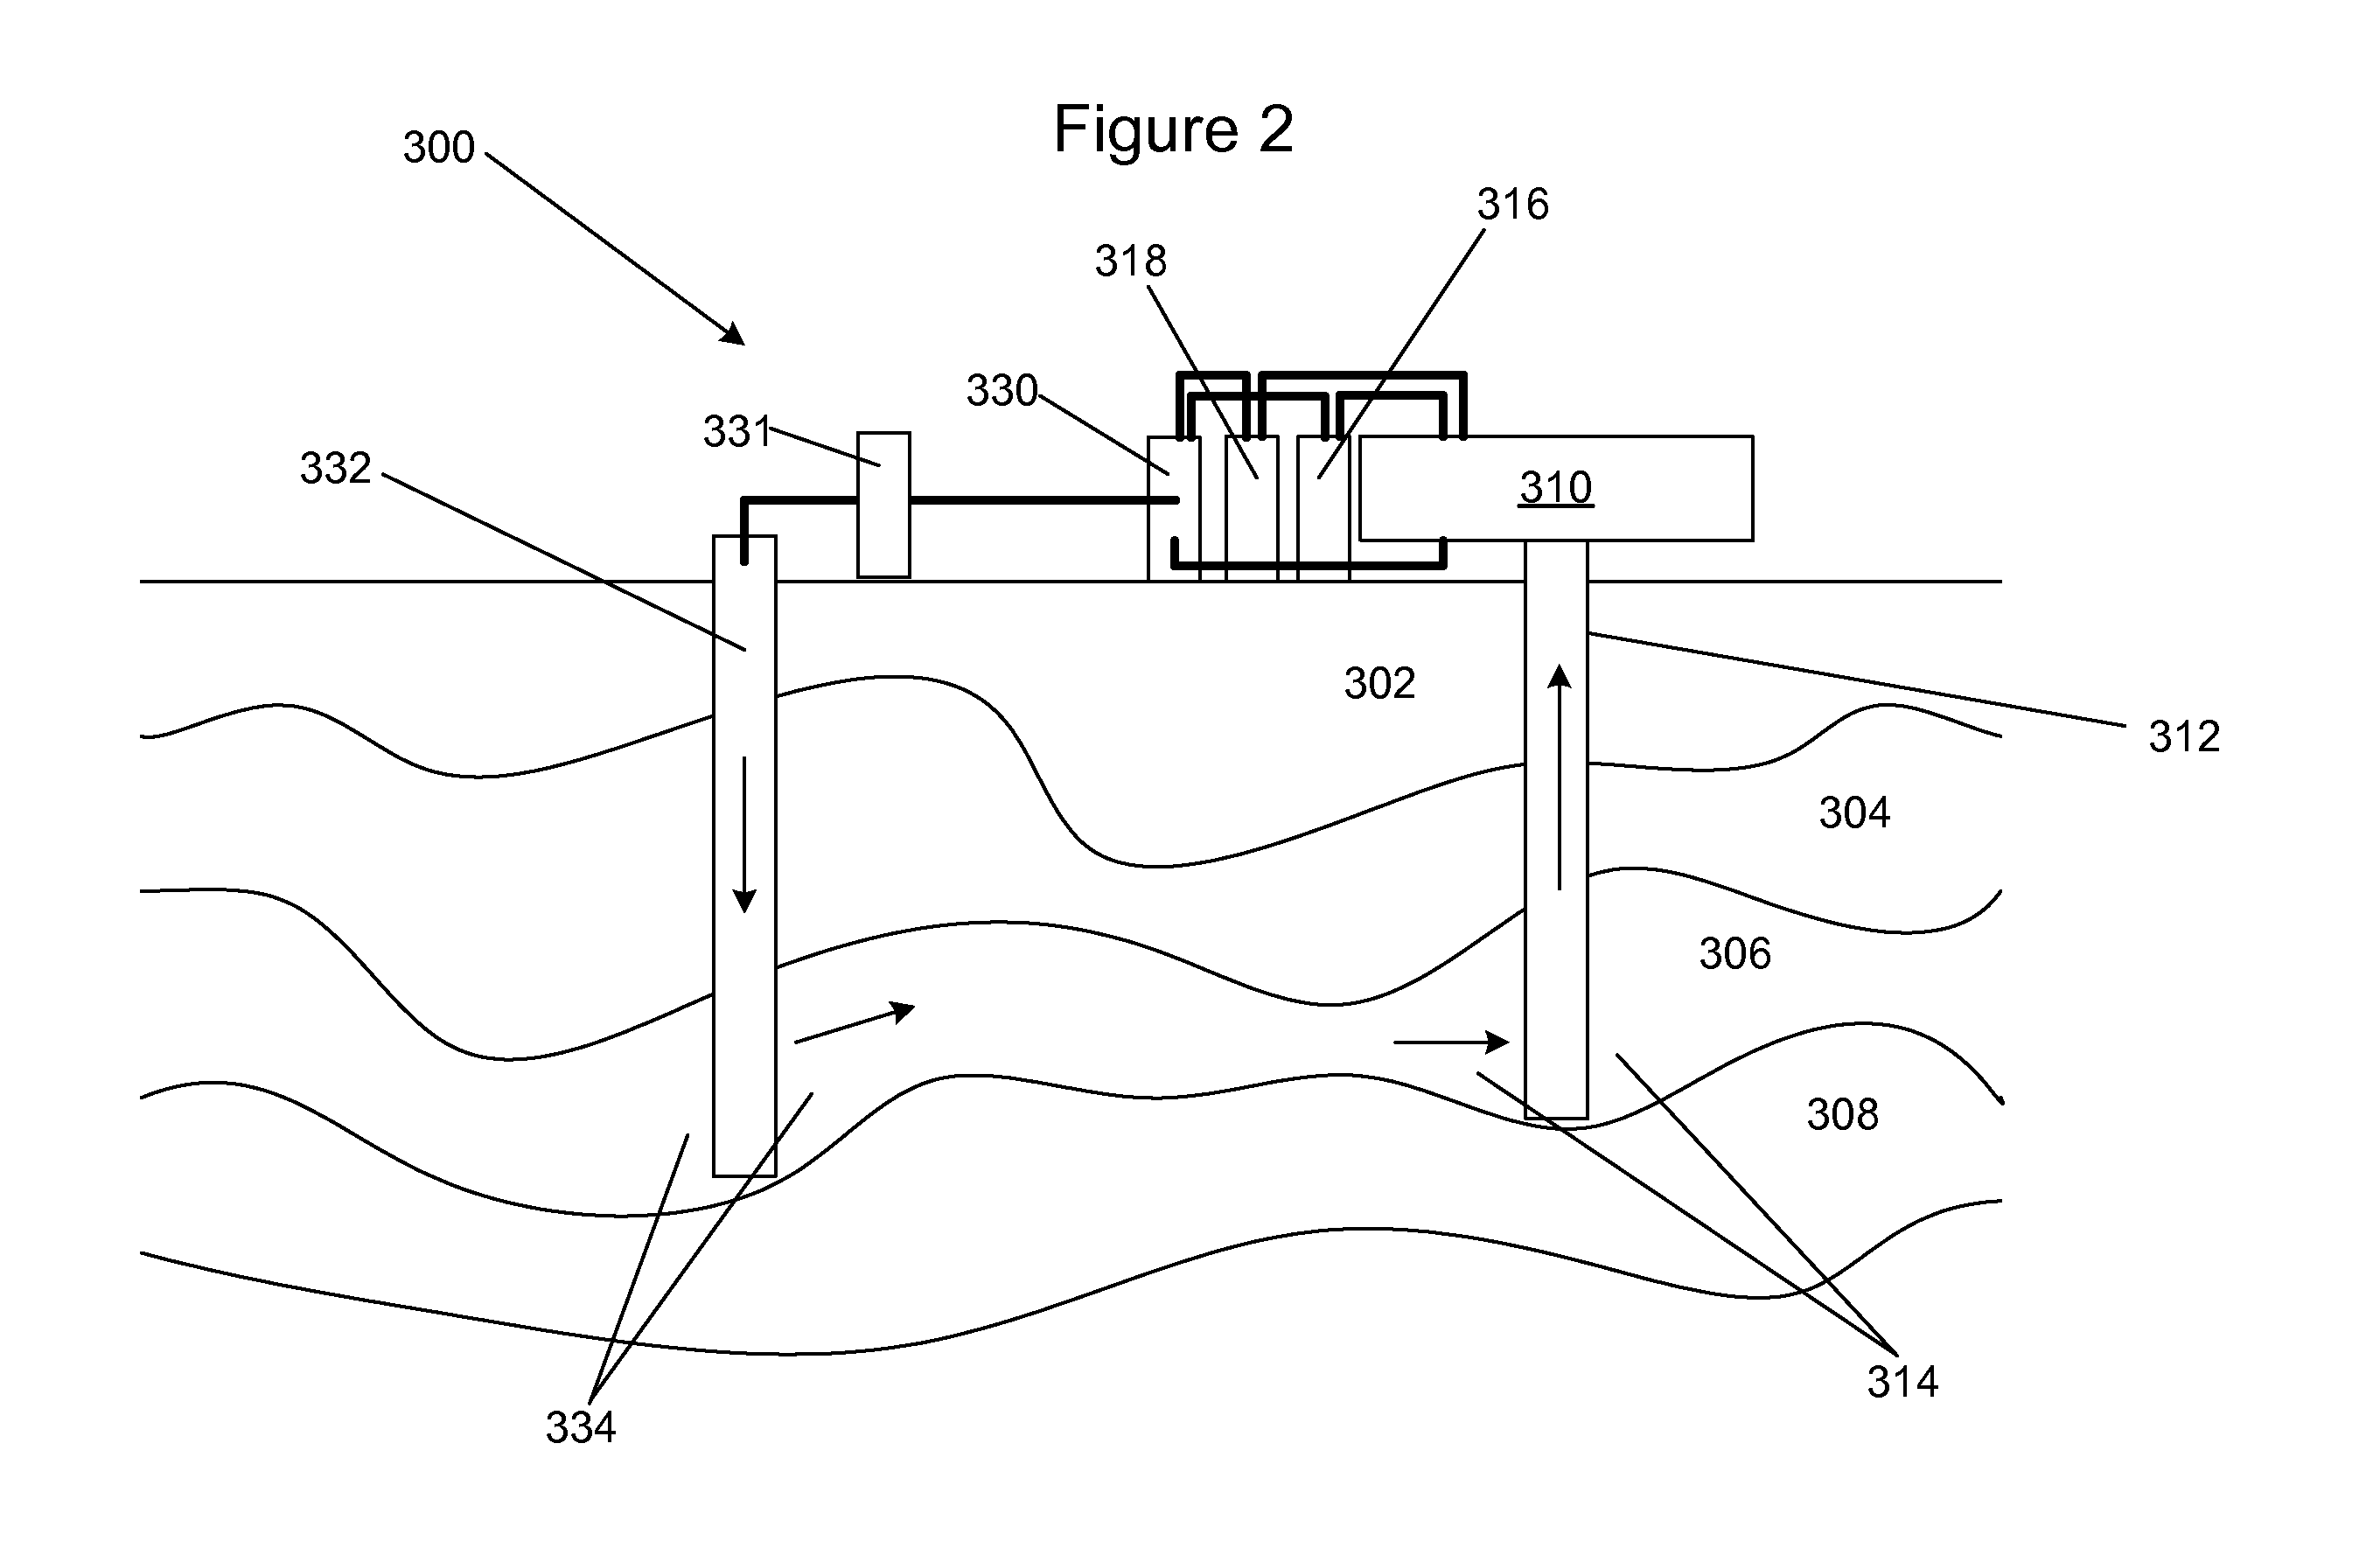 Systems and methods for producing oil and/or gas